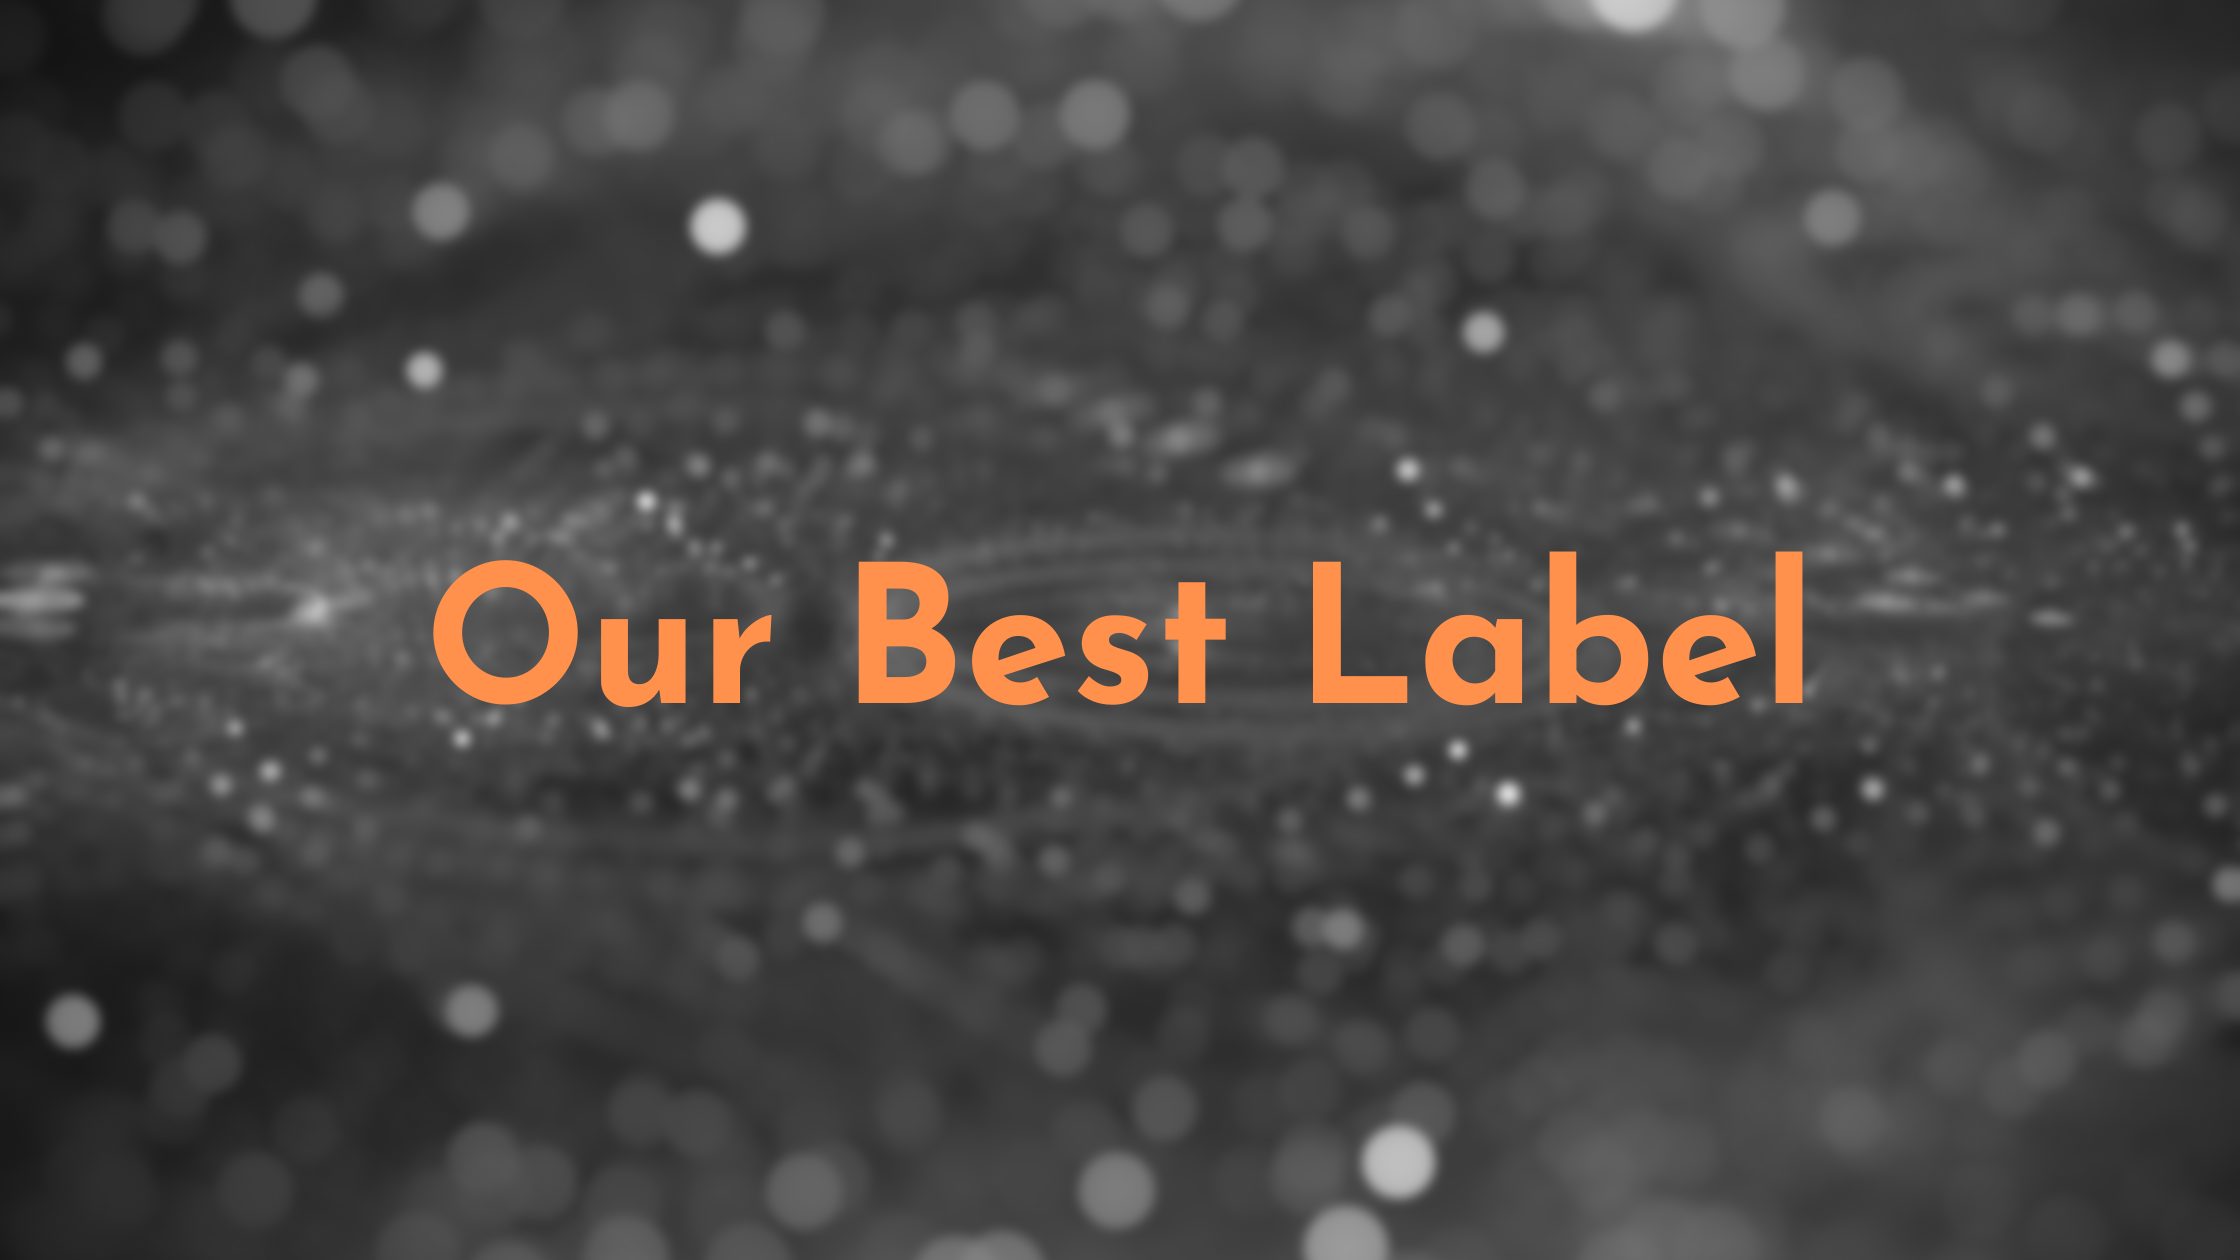 Our Best Label